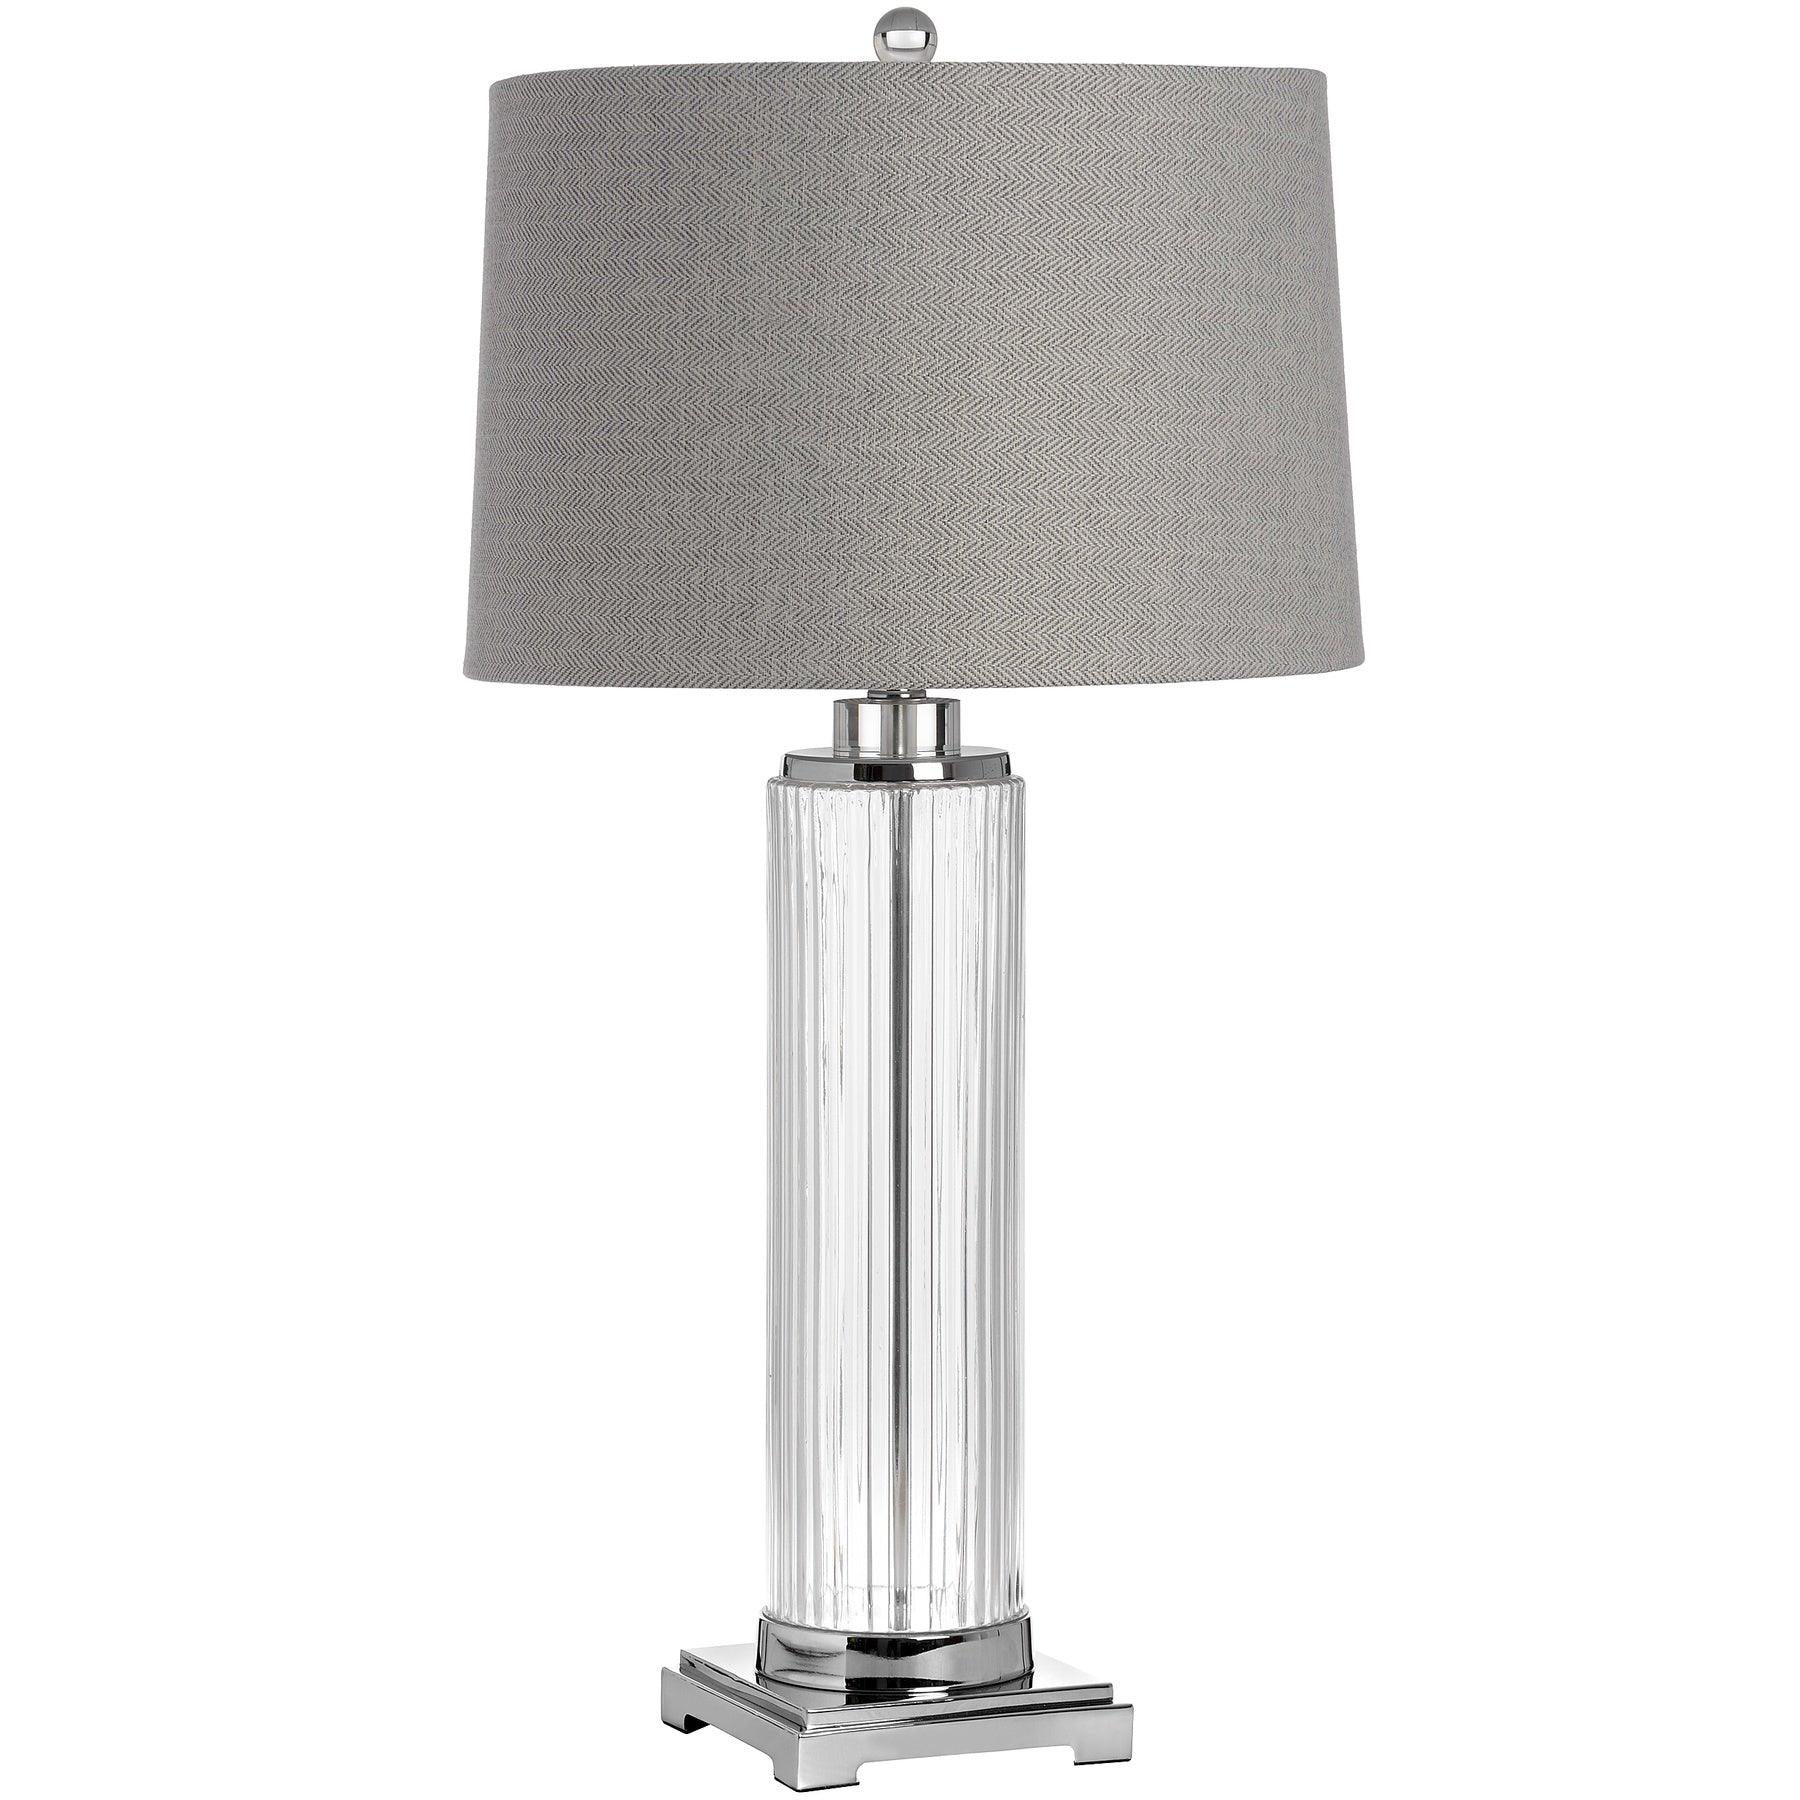 View Roma Glass Table Lamp information